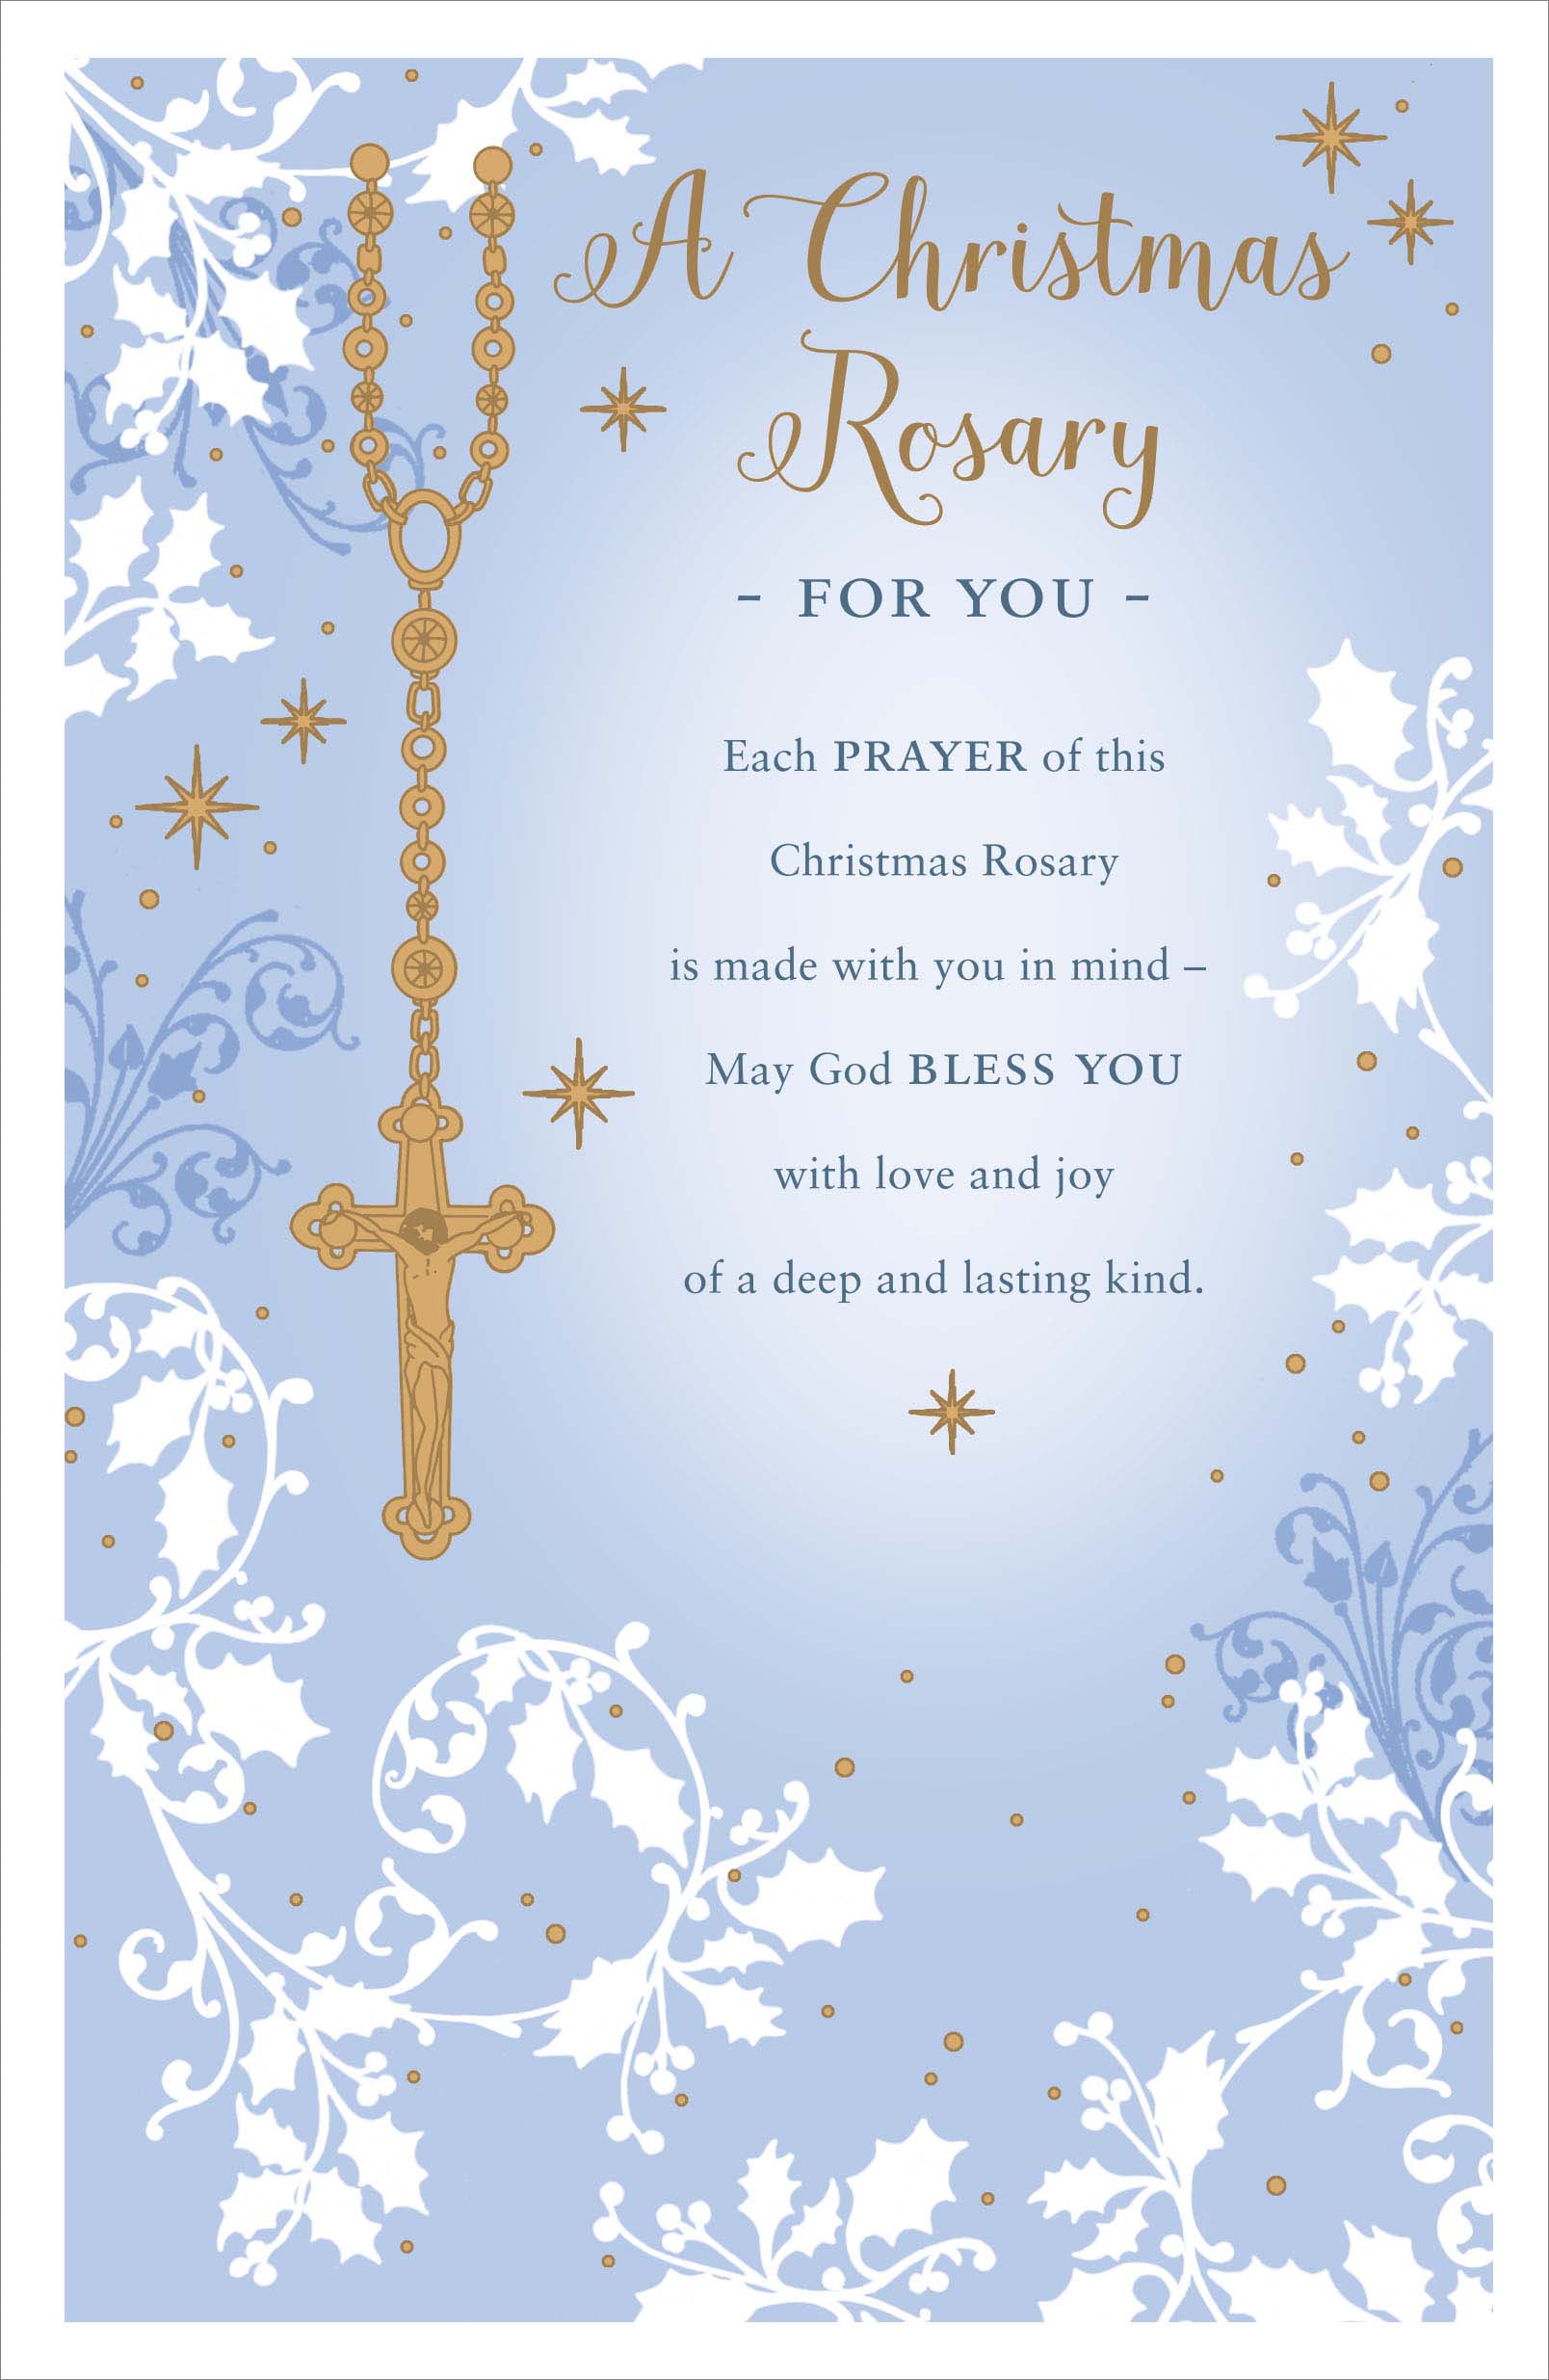 For You Christmas Card - Lasting Kind & Flower